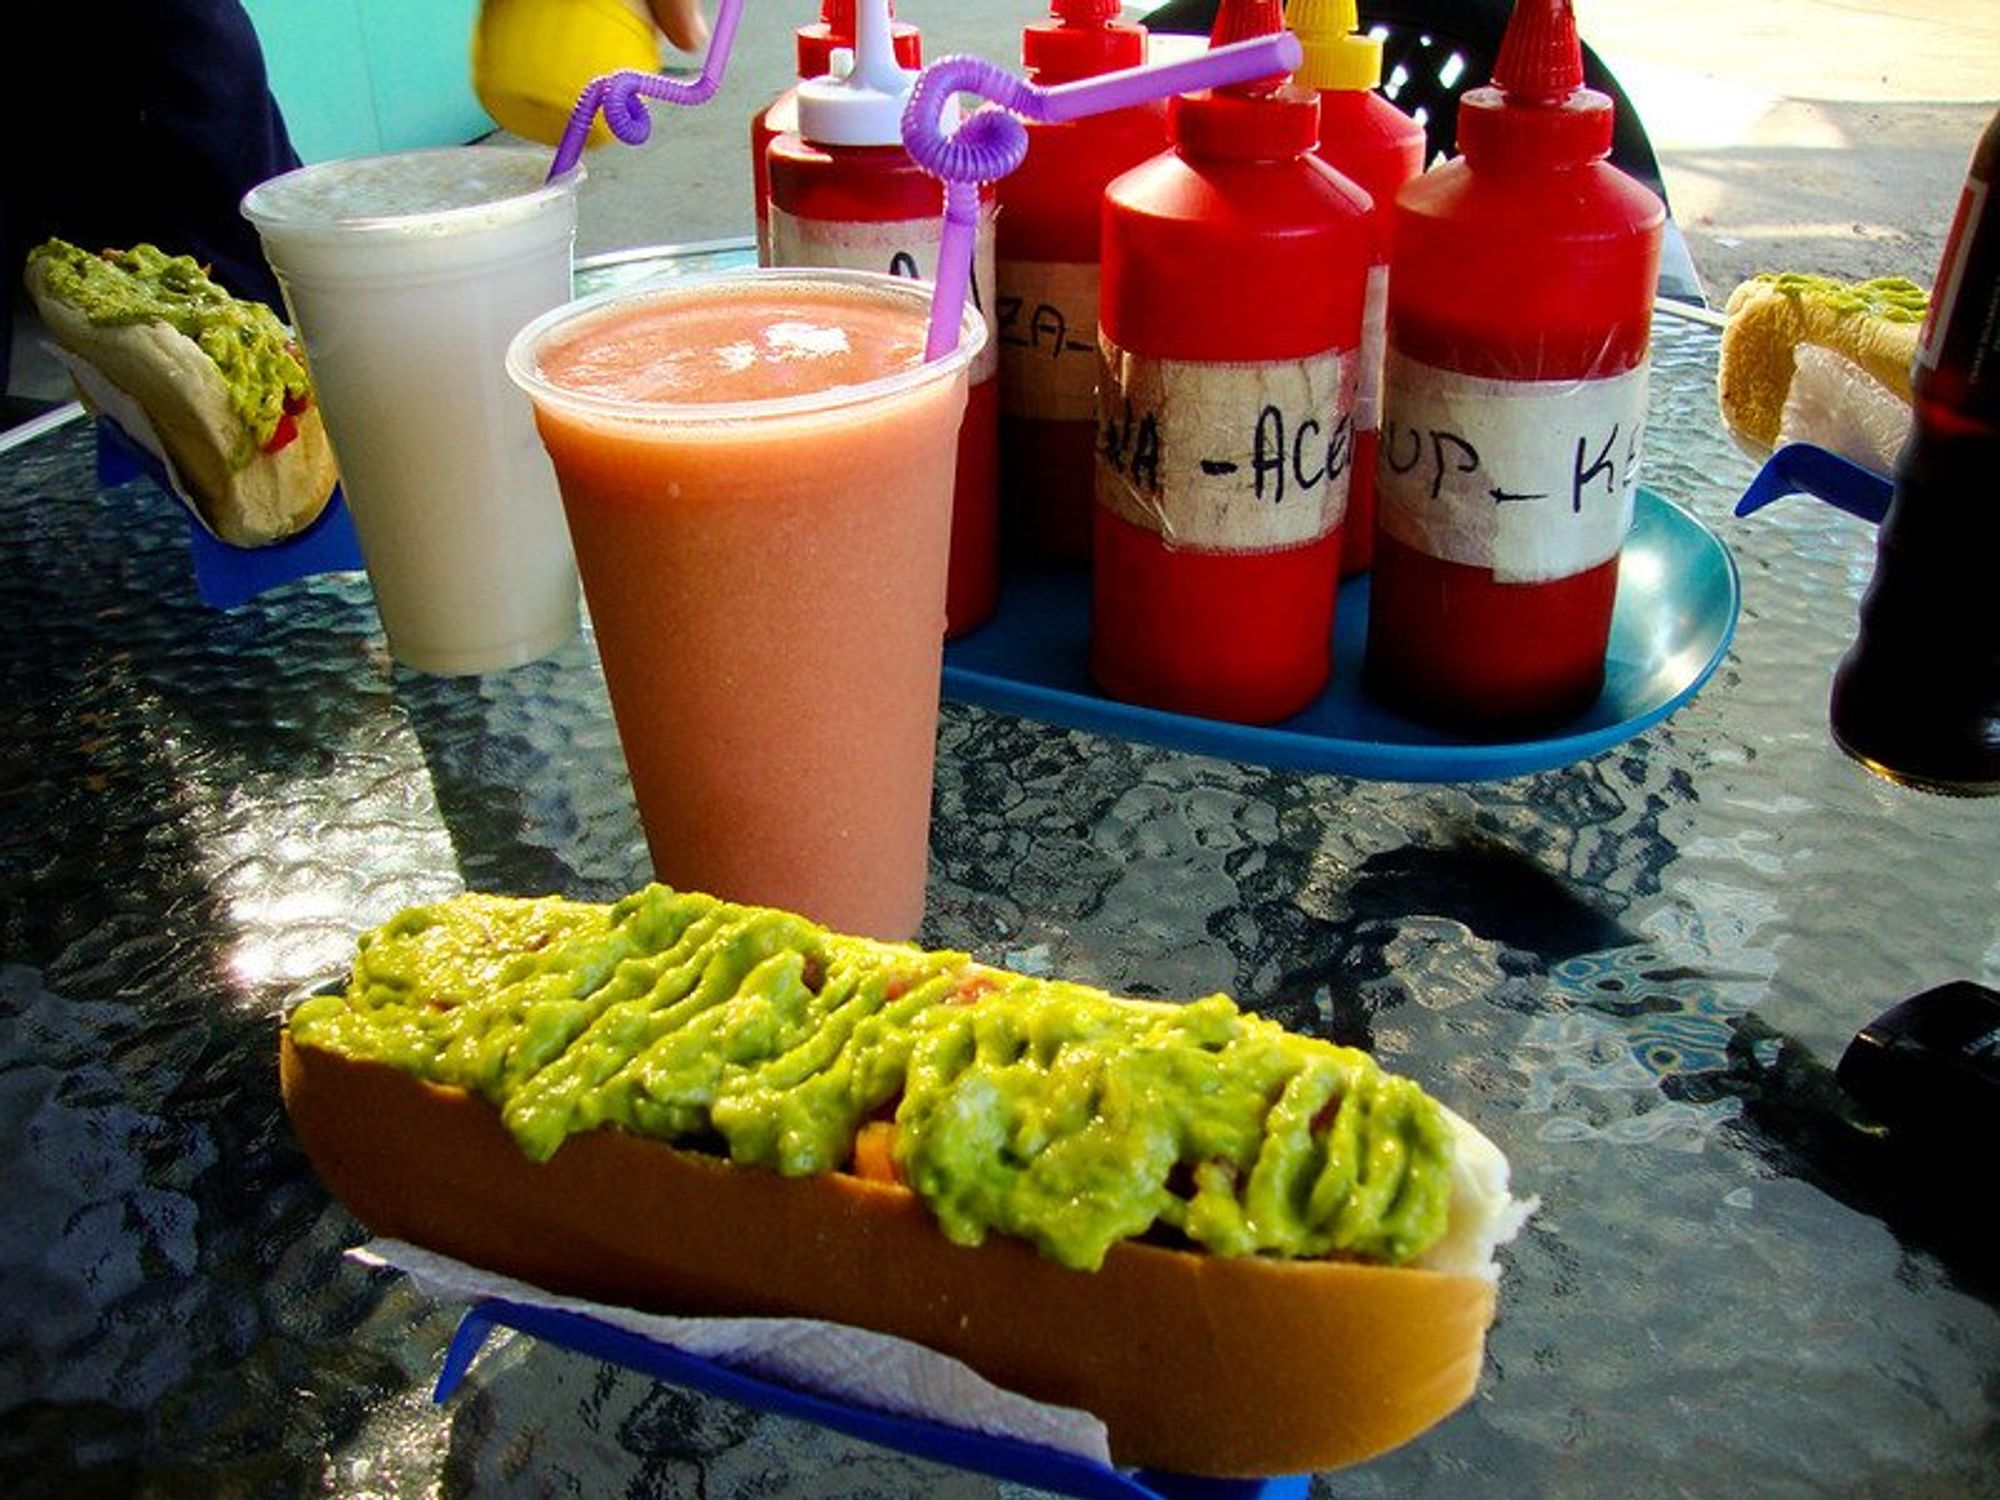 A hot dog or completo for lunch in Pica Chile